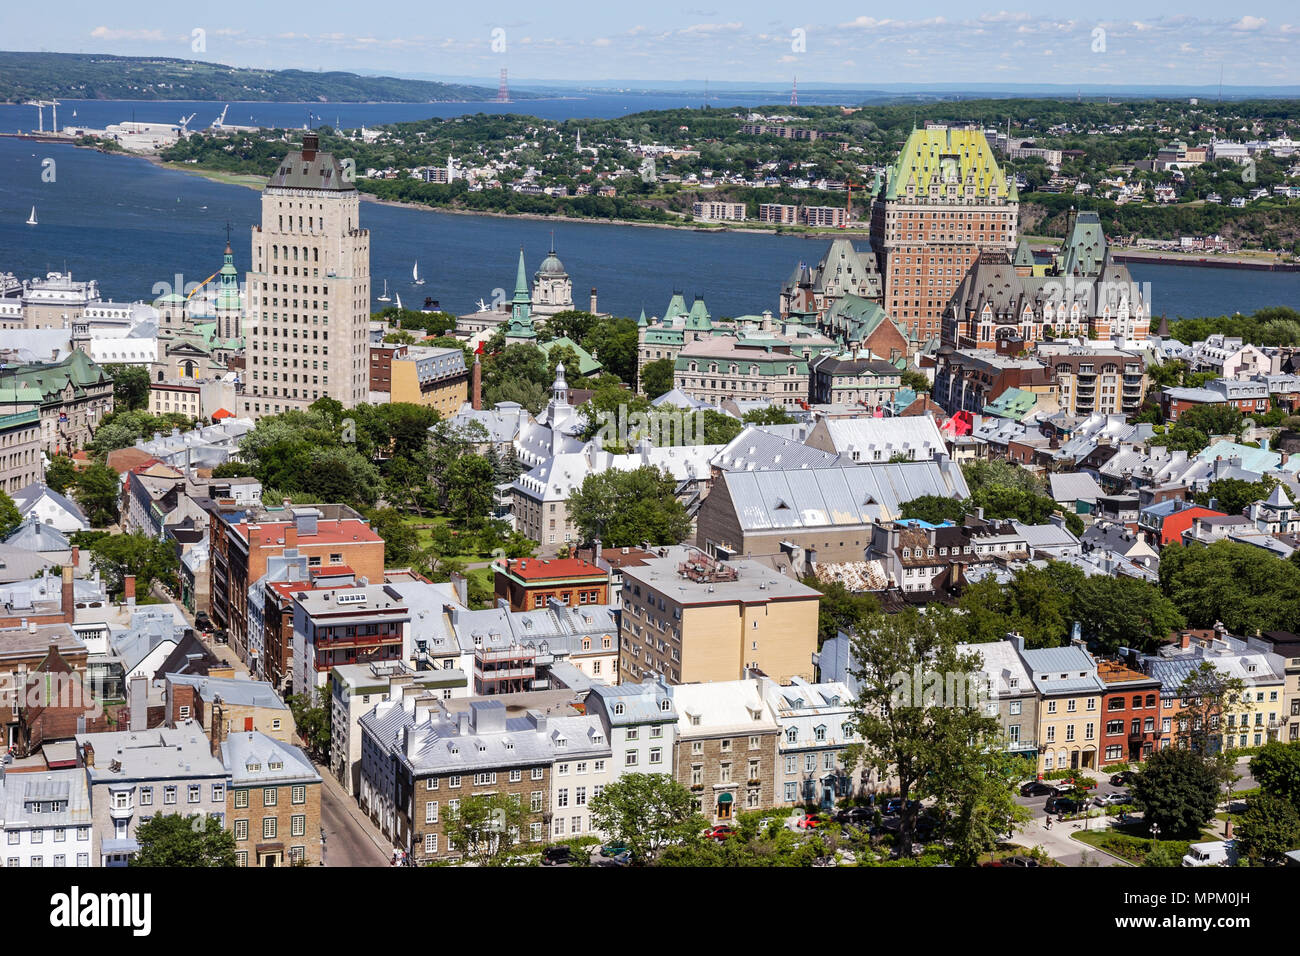 Quebec Canada,Upper Town,St. Lawrence River,Edifice Price,Fairmont Le Chateau Frontenac,hotel,Canada070712162 Stock Photo